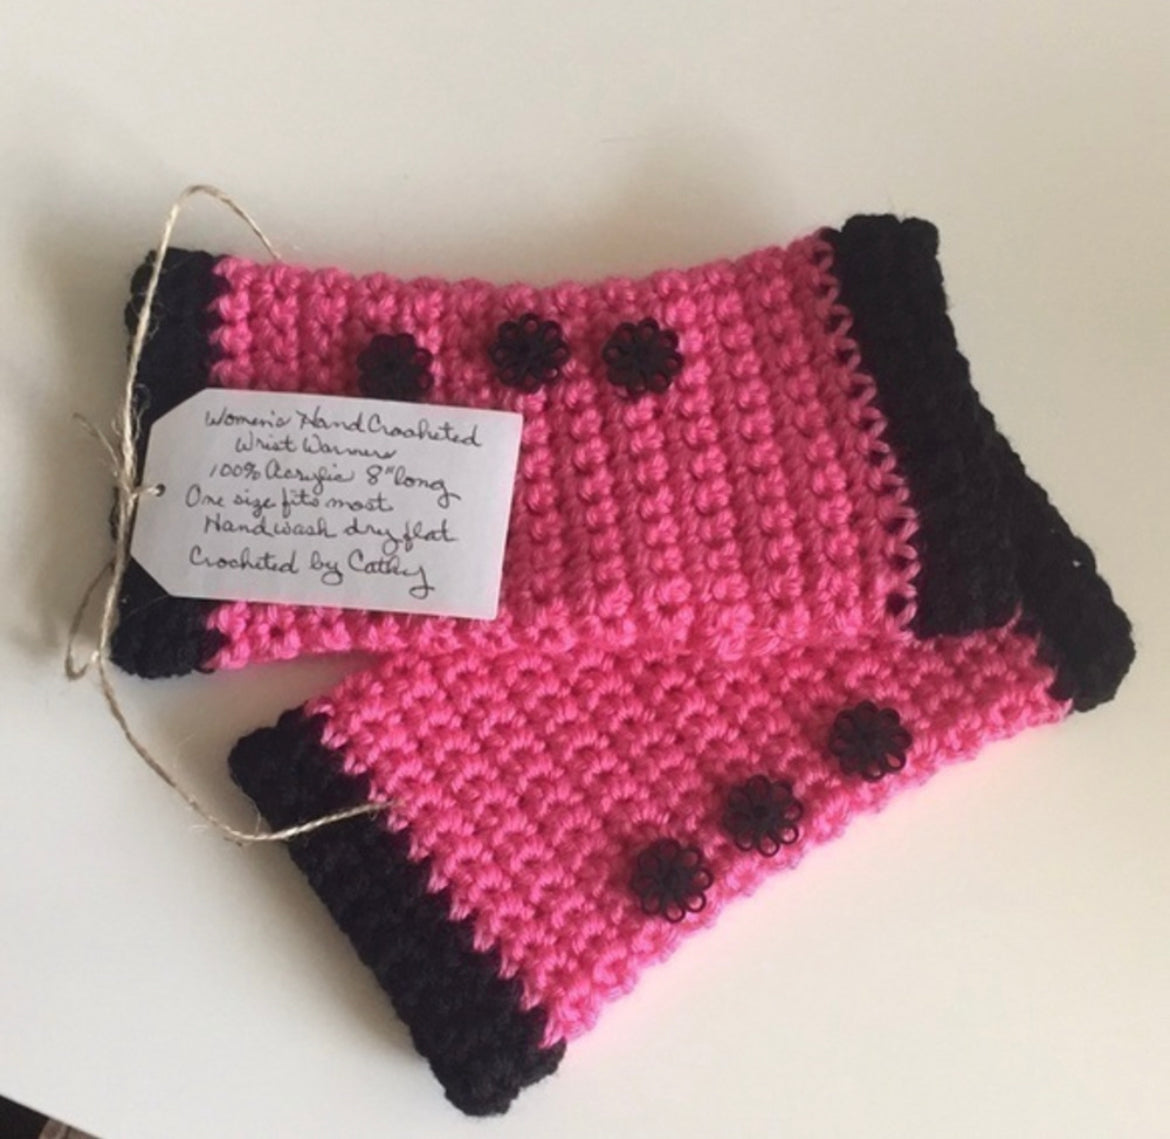 Texting Gaming Wrist Warmers Solid Hot Neon Pink Black Button & Double Trim Accent Crochet Knit Fall Winter Writing Tech Fingerless Gloves Embellished